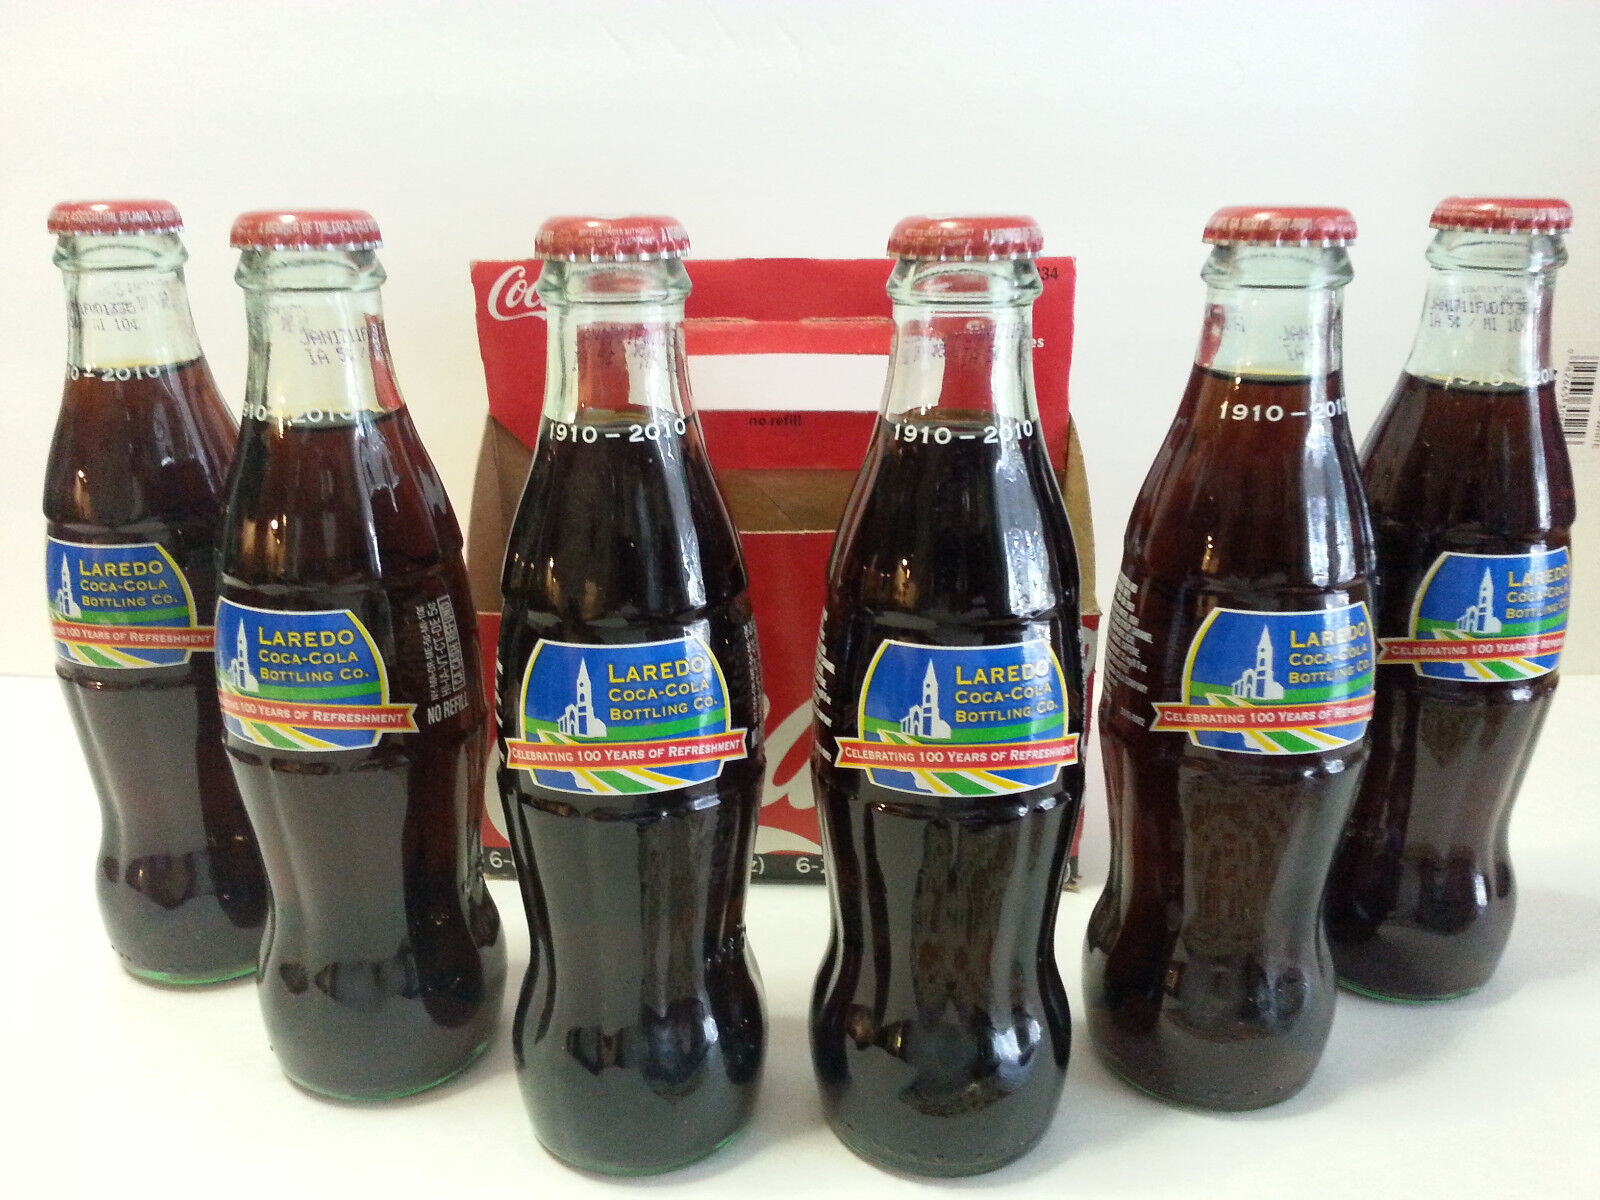 Catholic Cathedral Church on Laredo Coca Cola Bottles 100th Anniversary 6 pack 